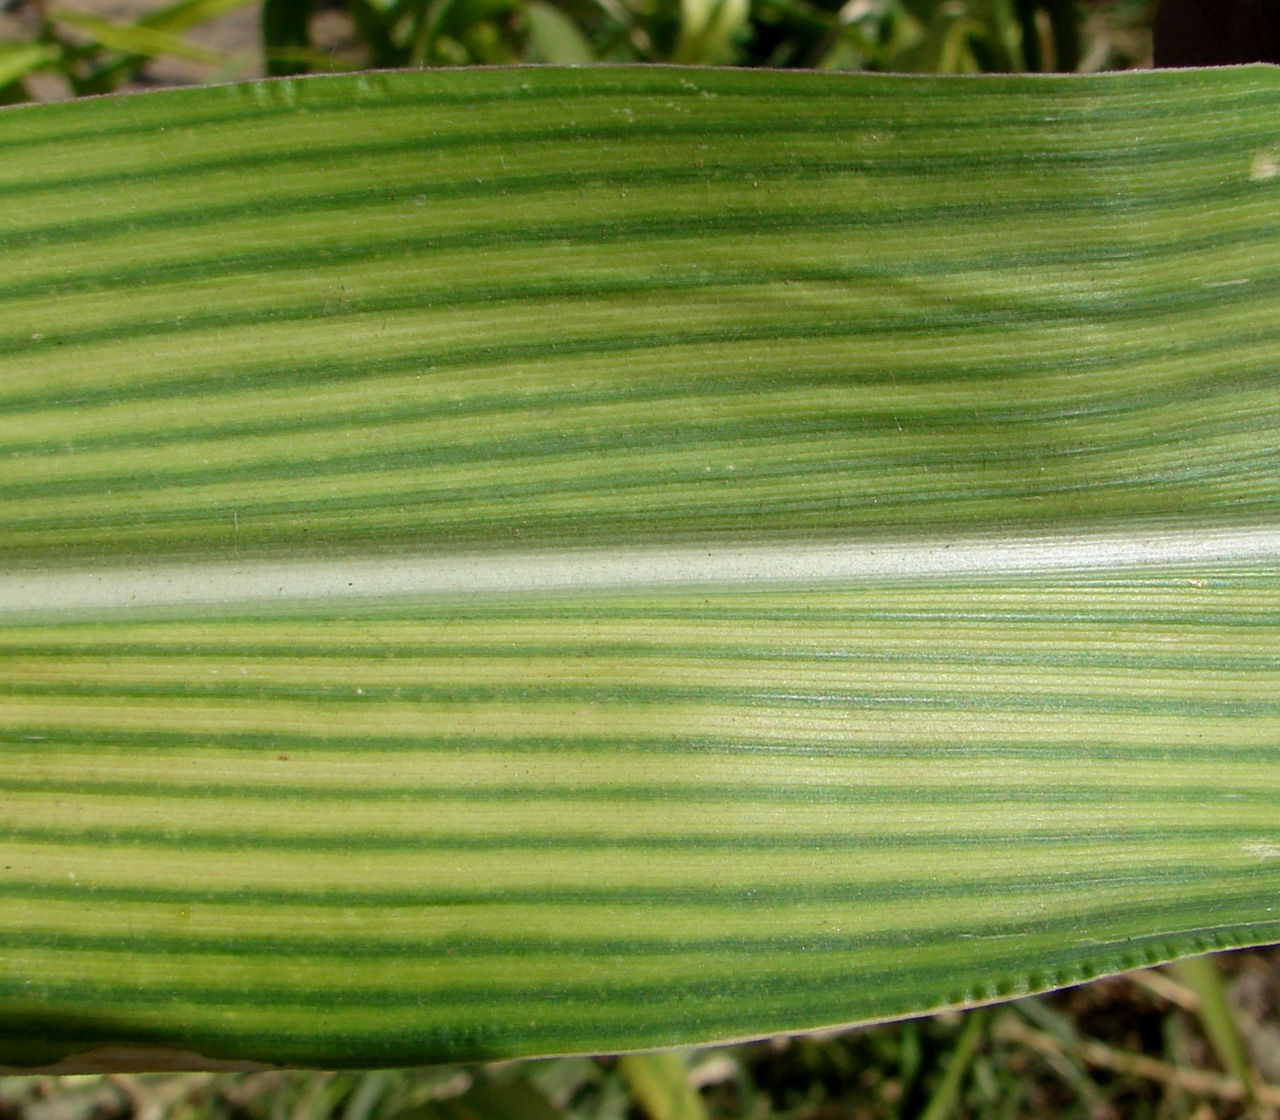 Figure 7. Iron (Fe) Deficiency in Corn. Photo is provided courtesy of the International Plant Nutrition Institute (IPNI) and its IPNI Crop Nutrient Deficiency Image Collection, M, K. Sharma and P. Kumar 